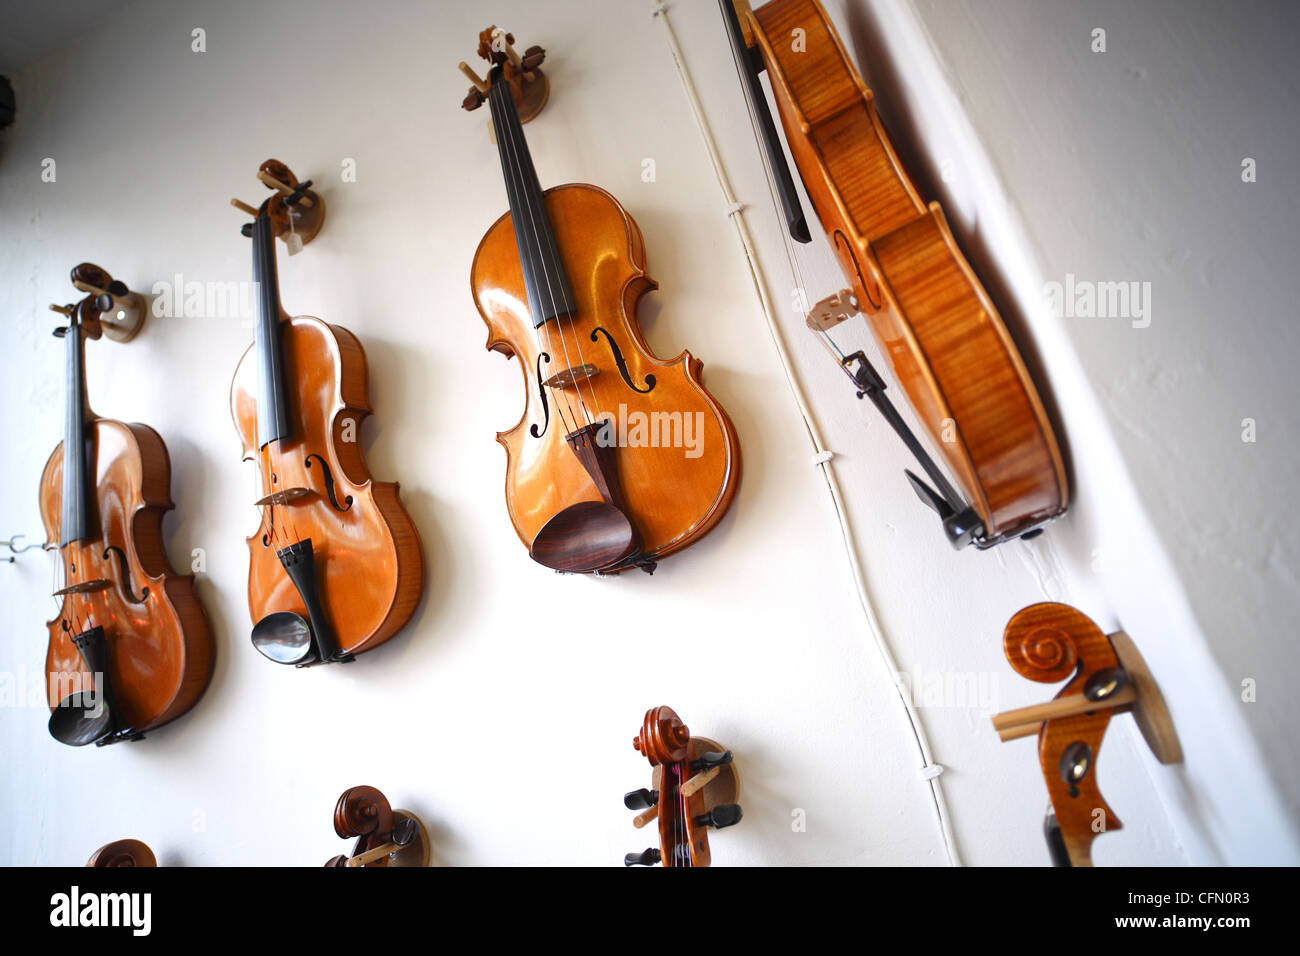 Violins on sale in a music shop. Stock Photo